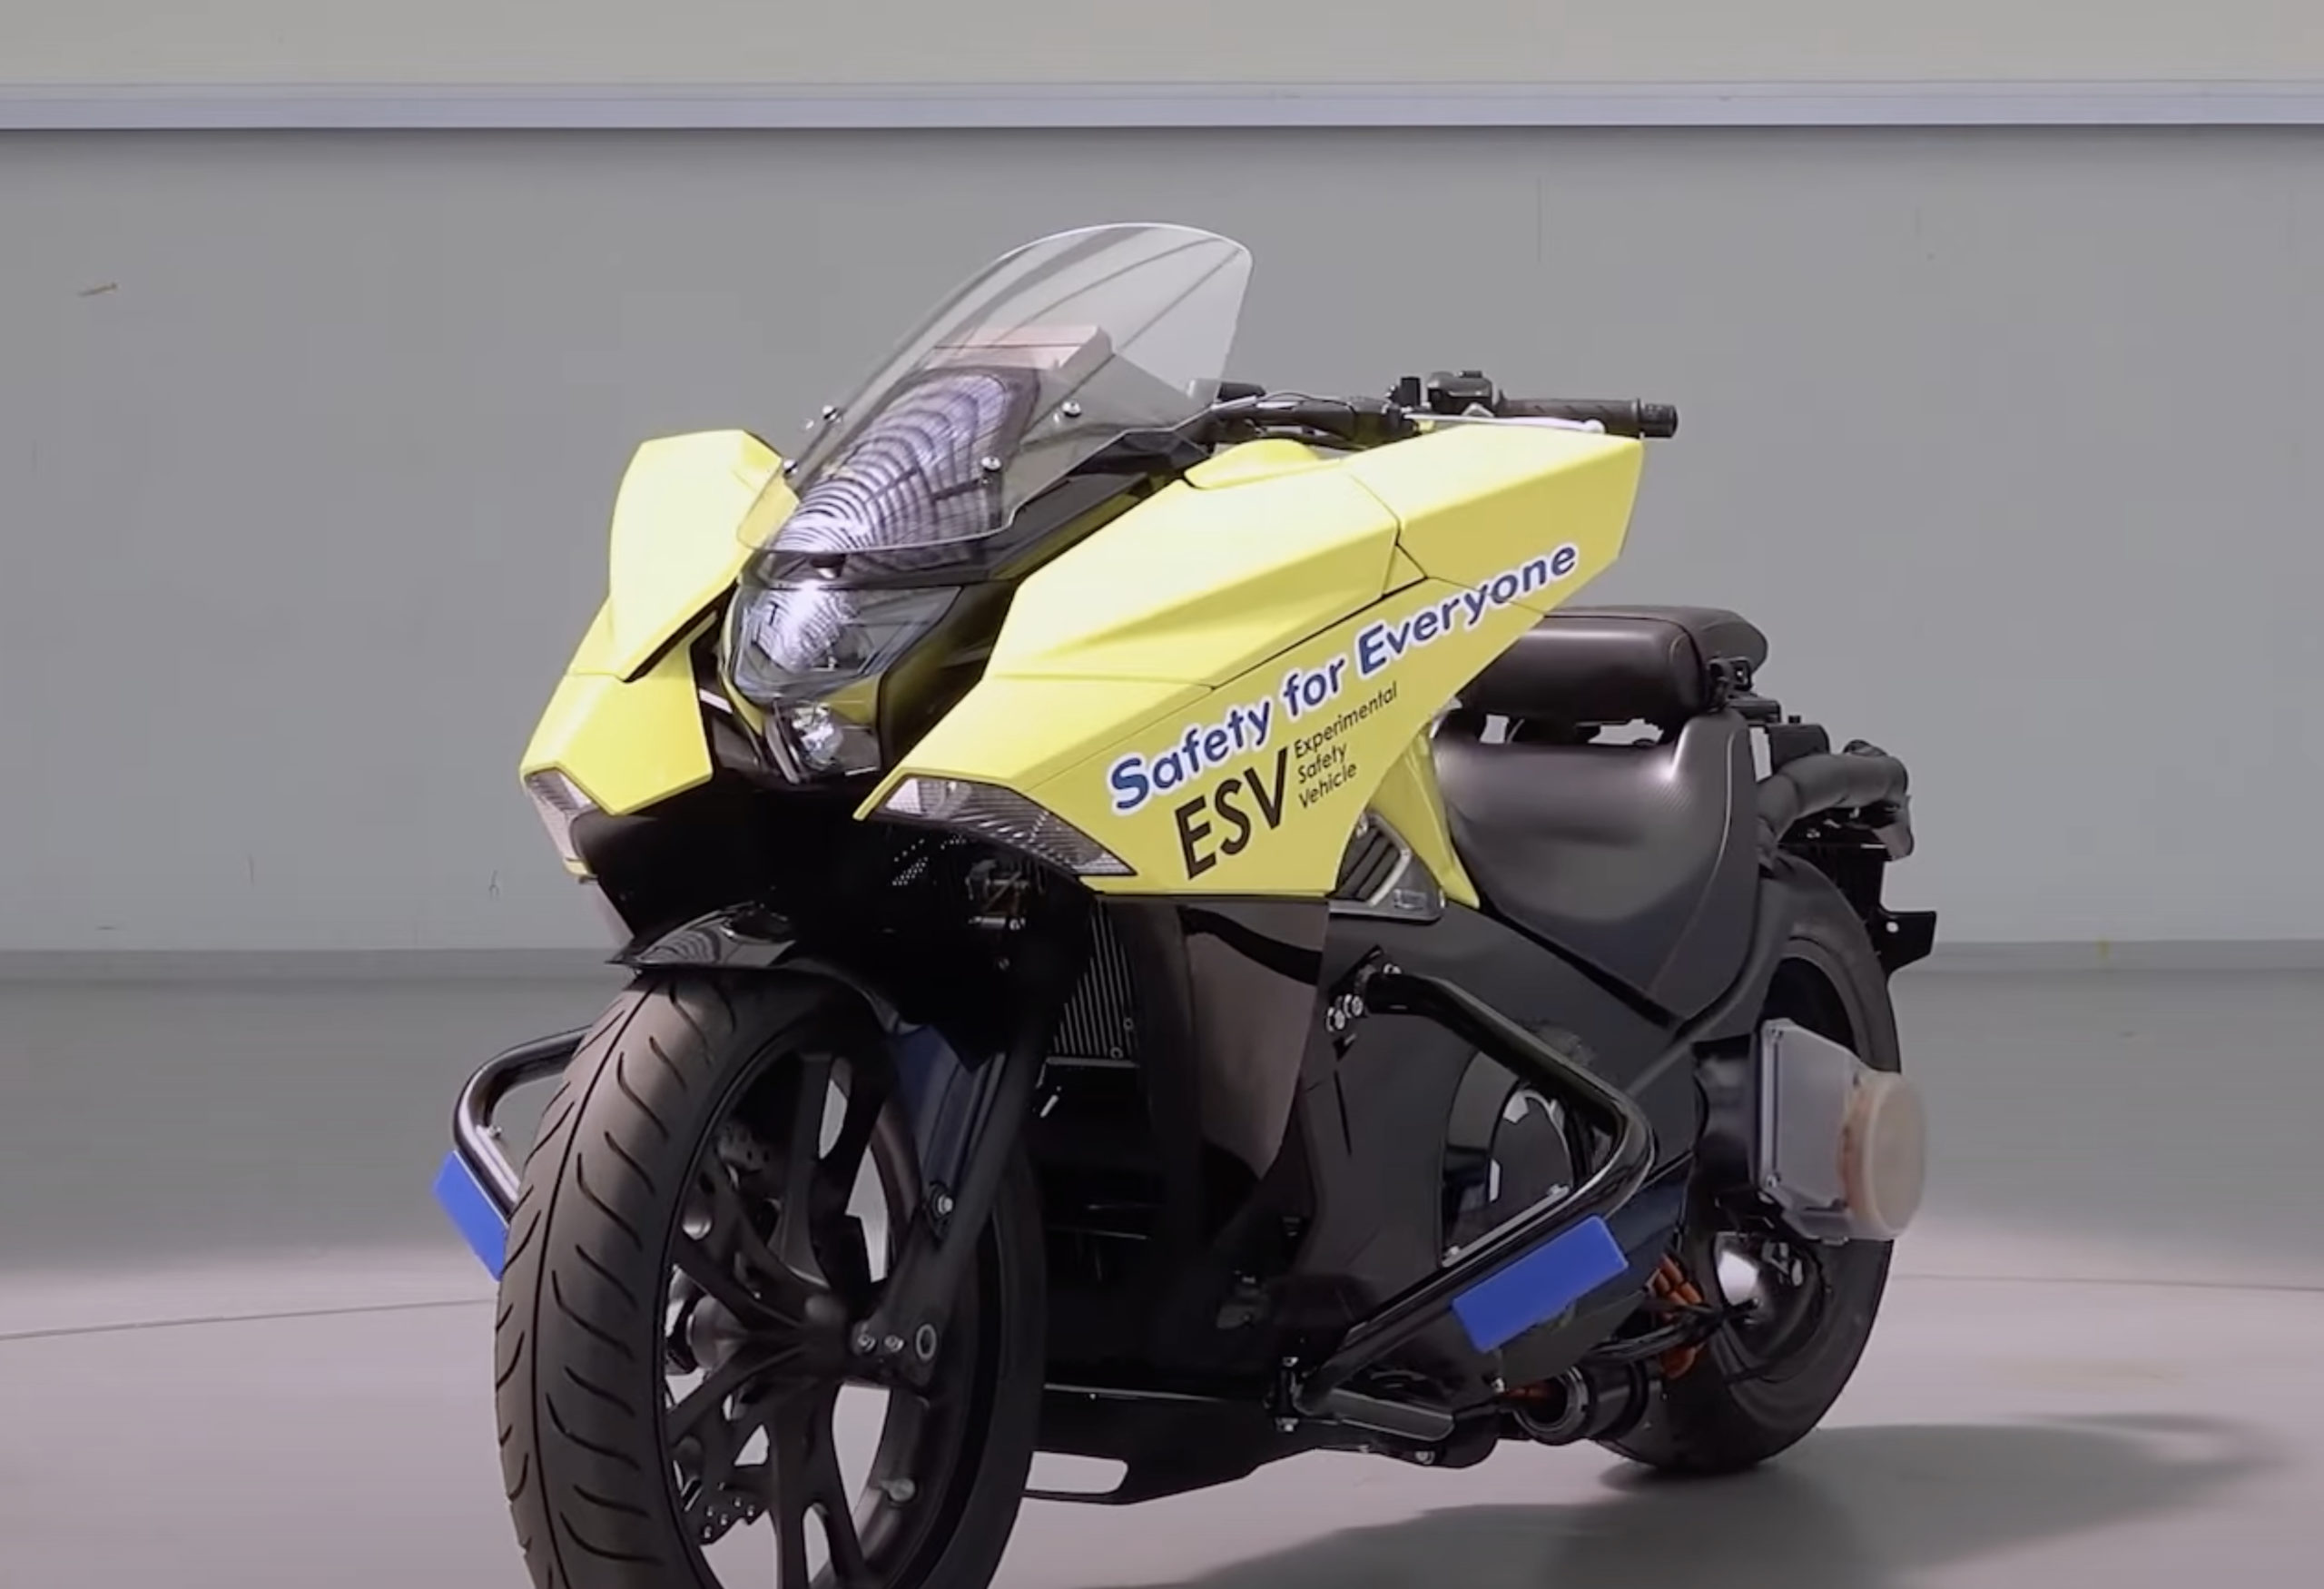 A view of the Experimental Safety Vehicle that Honda used in their recent World premiere of safety technologies to promote the company's progressive projects in regards to rider safety.